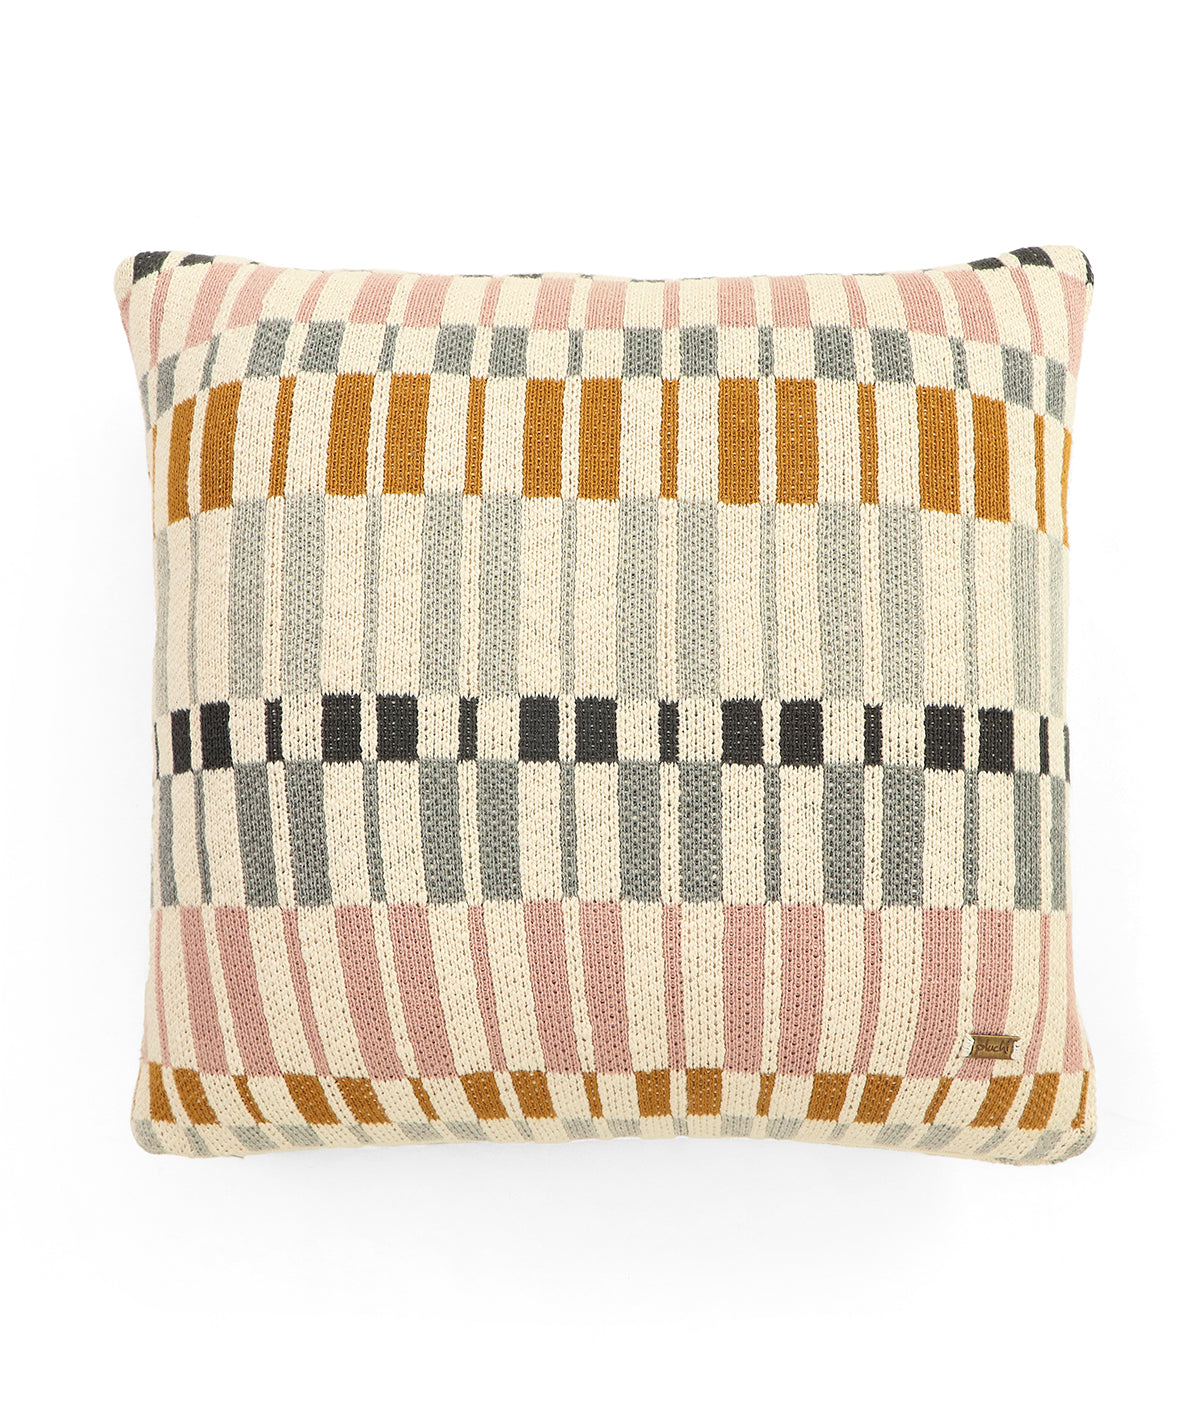 Awning Stripe Multi Color Cotton Knitted Decorative 16 X 16 Inches Cushion Cover